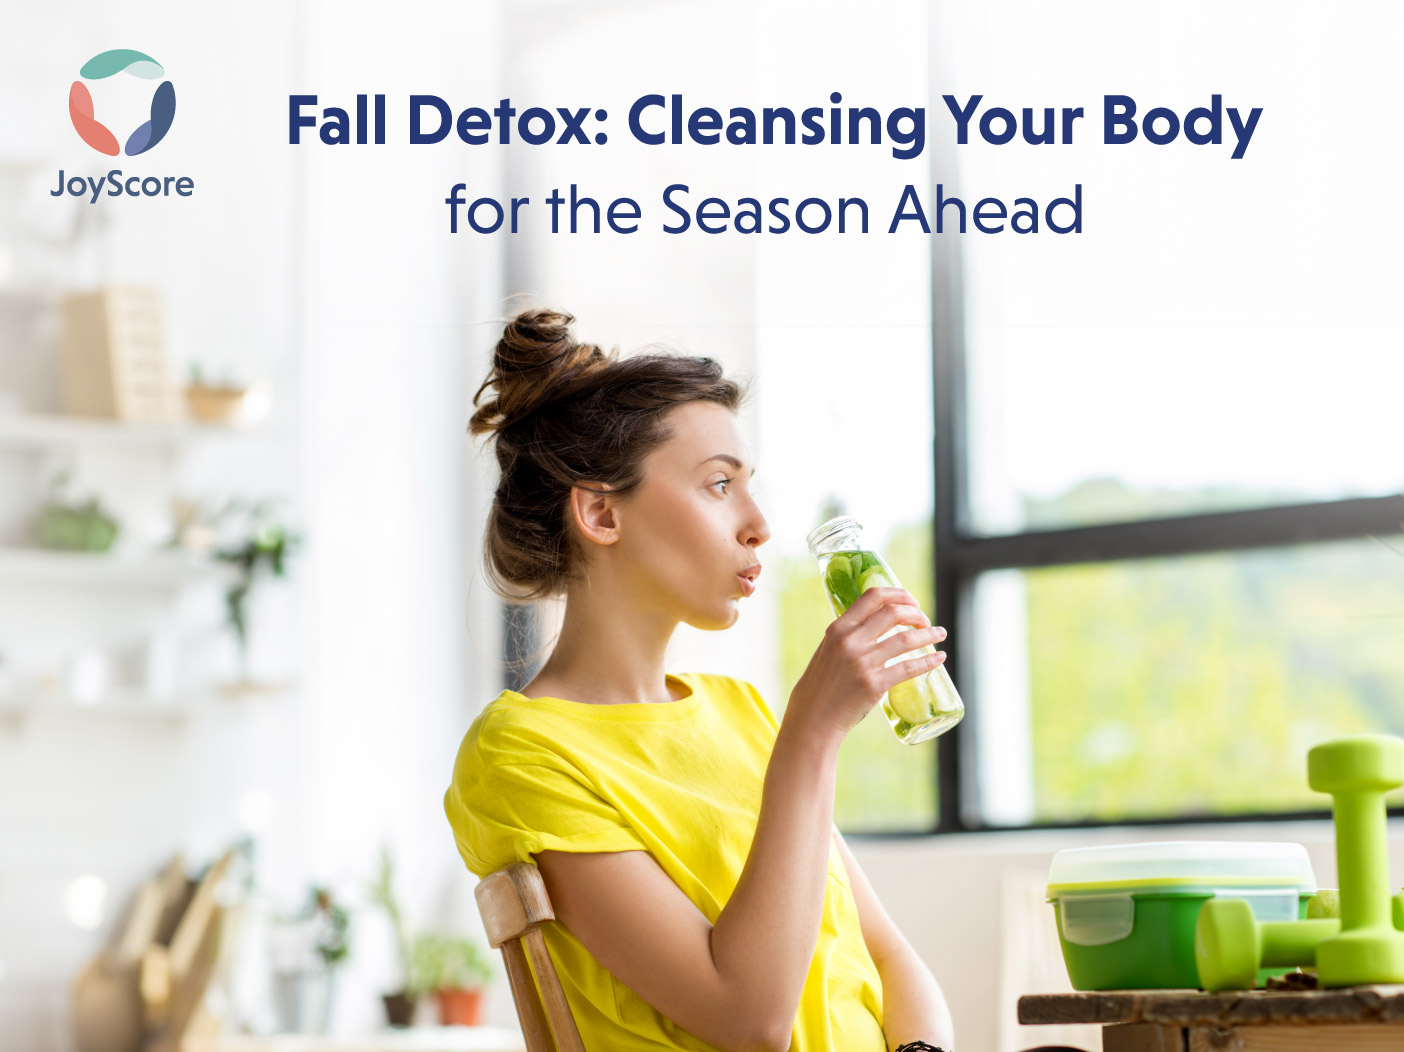 Fall Detox: Cleansing Your Body For The Season Ahead